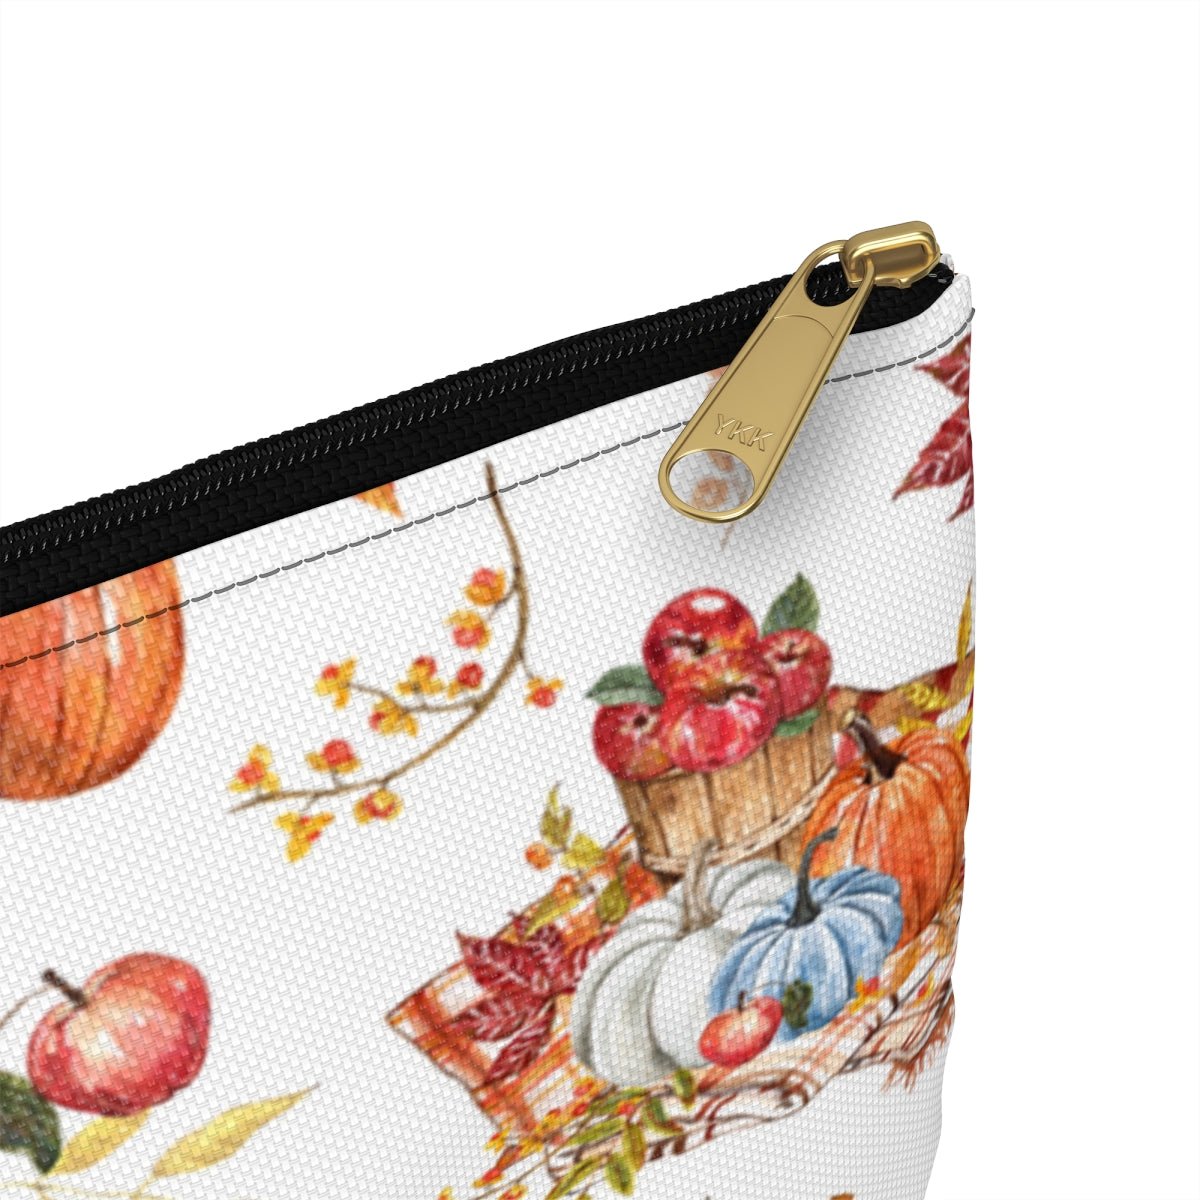 Fall Pumpkins and Apples Accessory Pouch - Puffin Lime